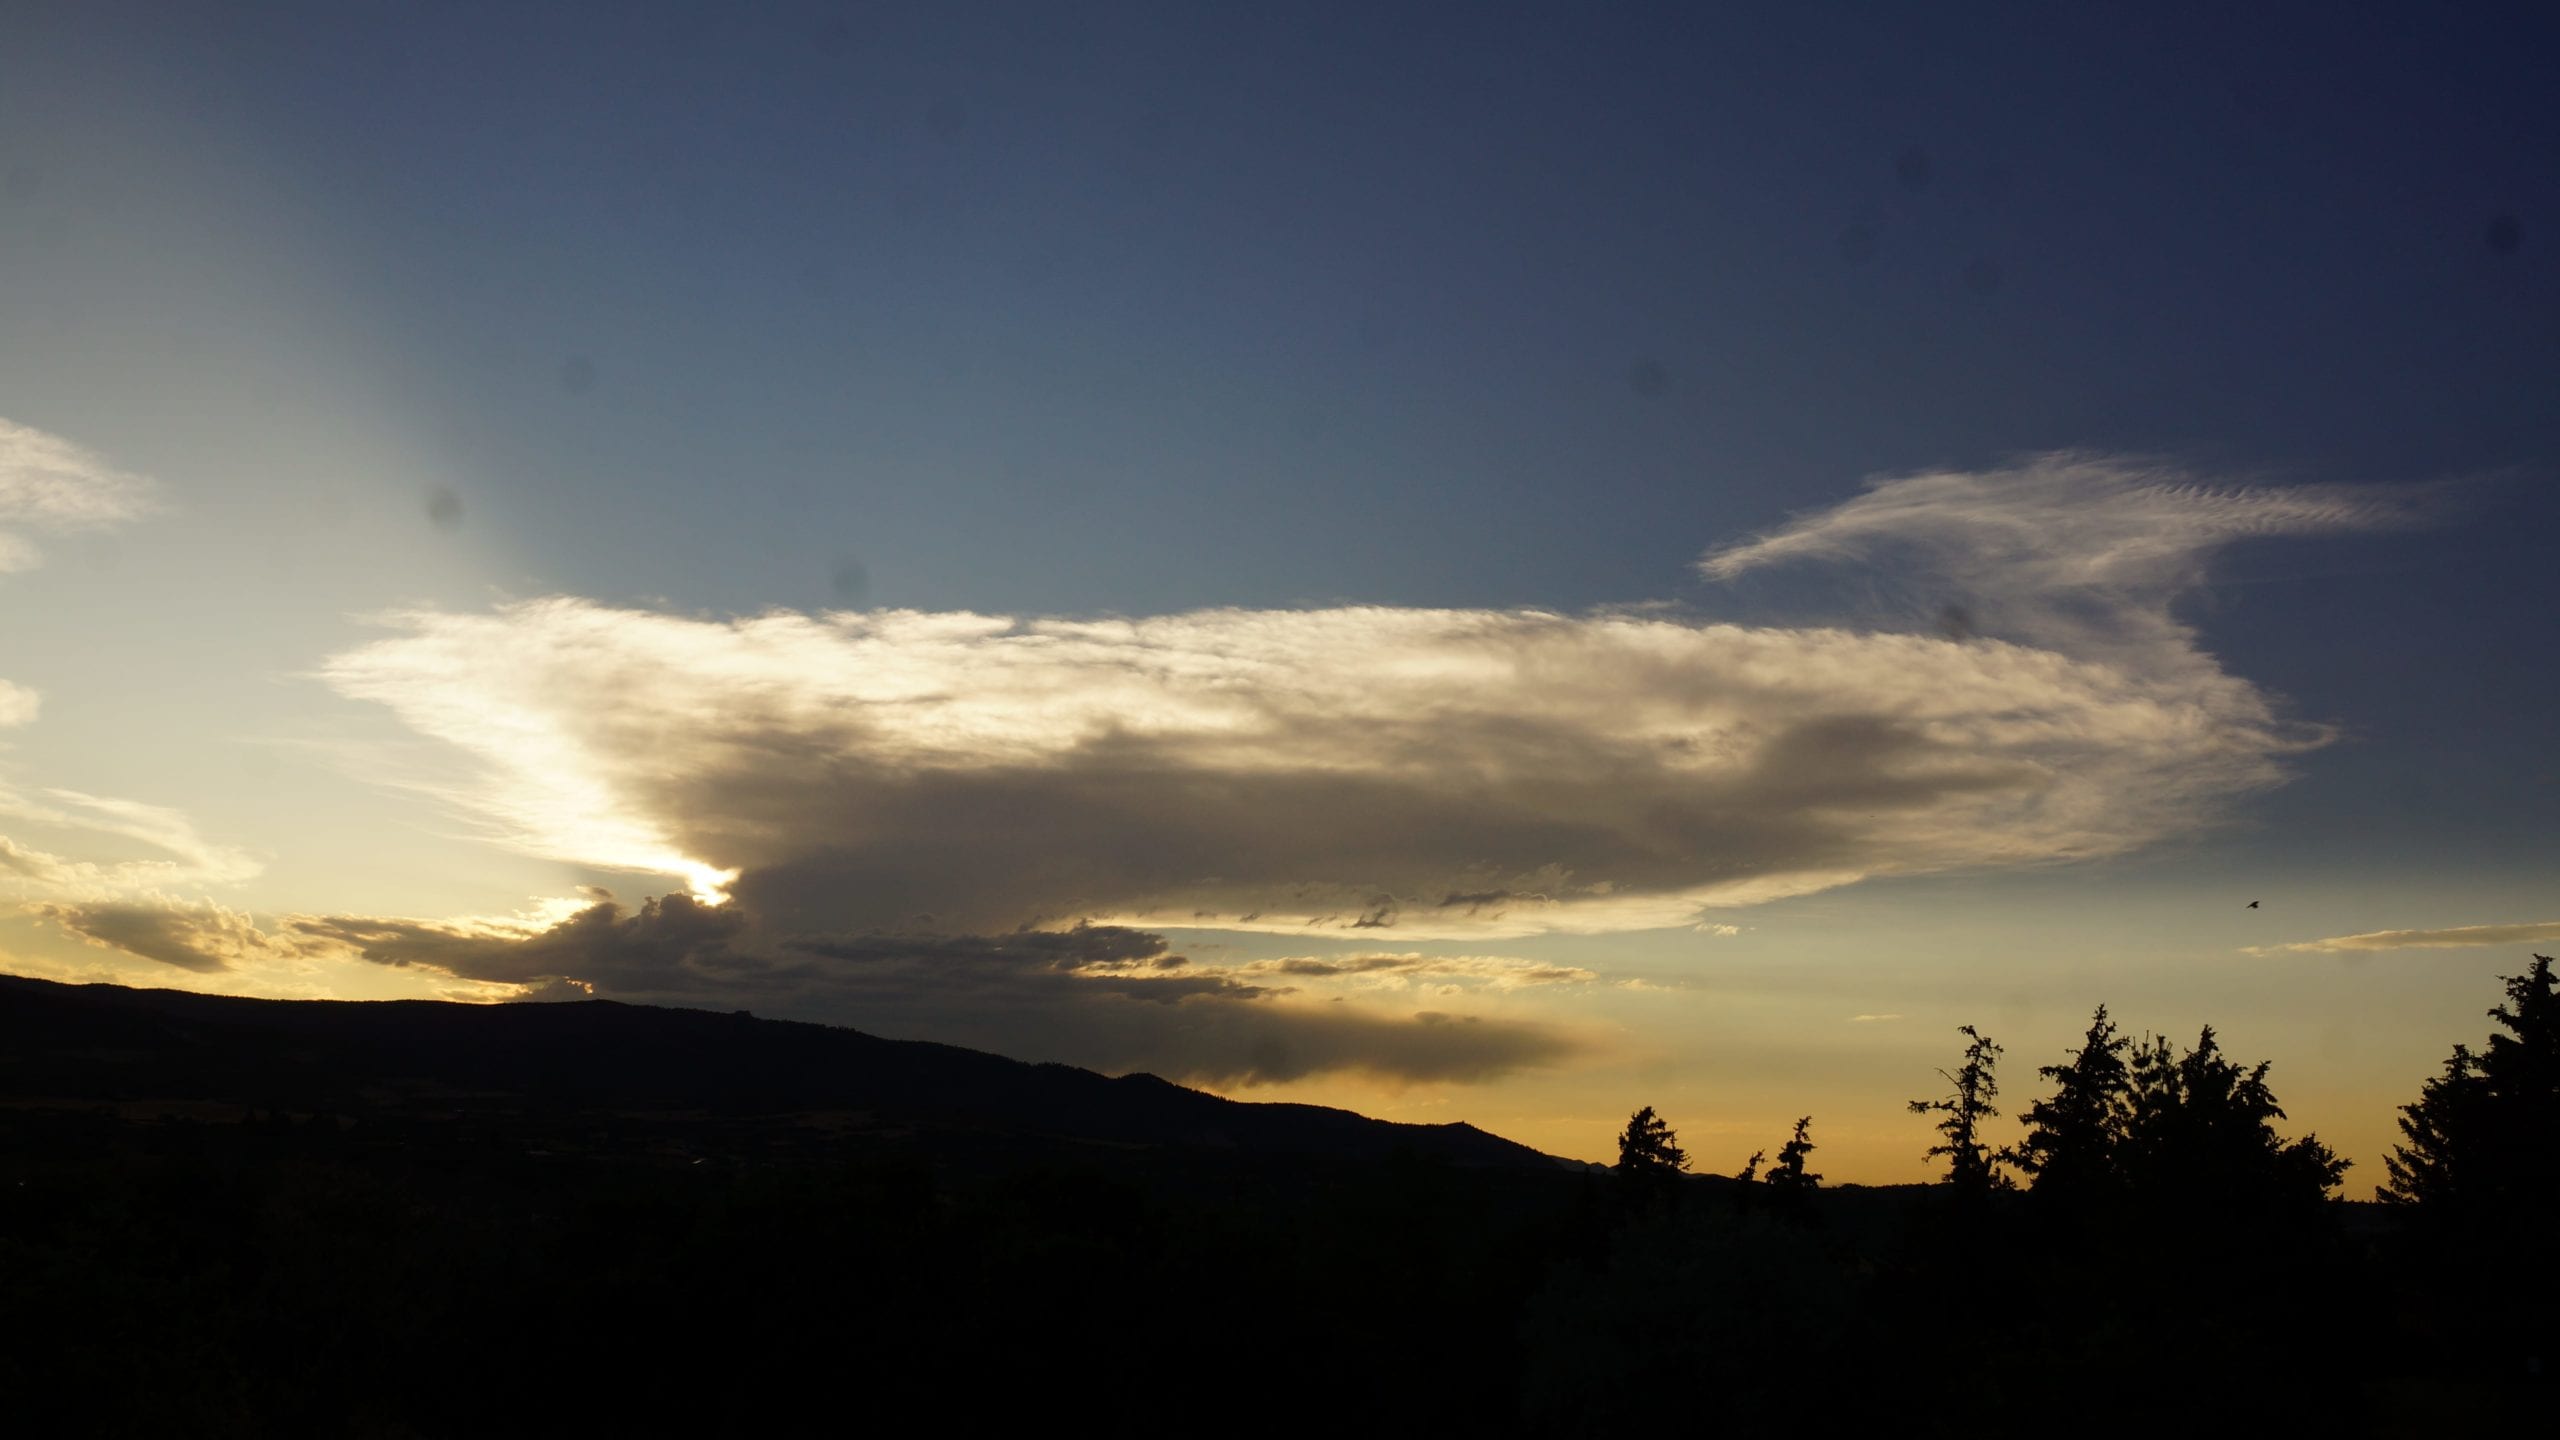 July sunset in Colorado with a dissolving thunderhead